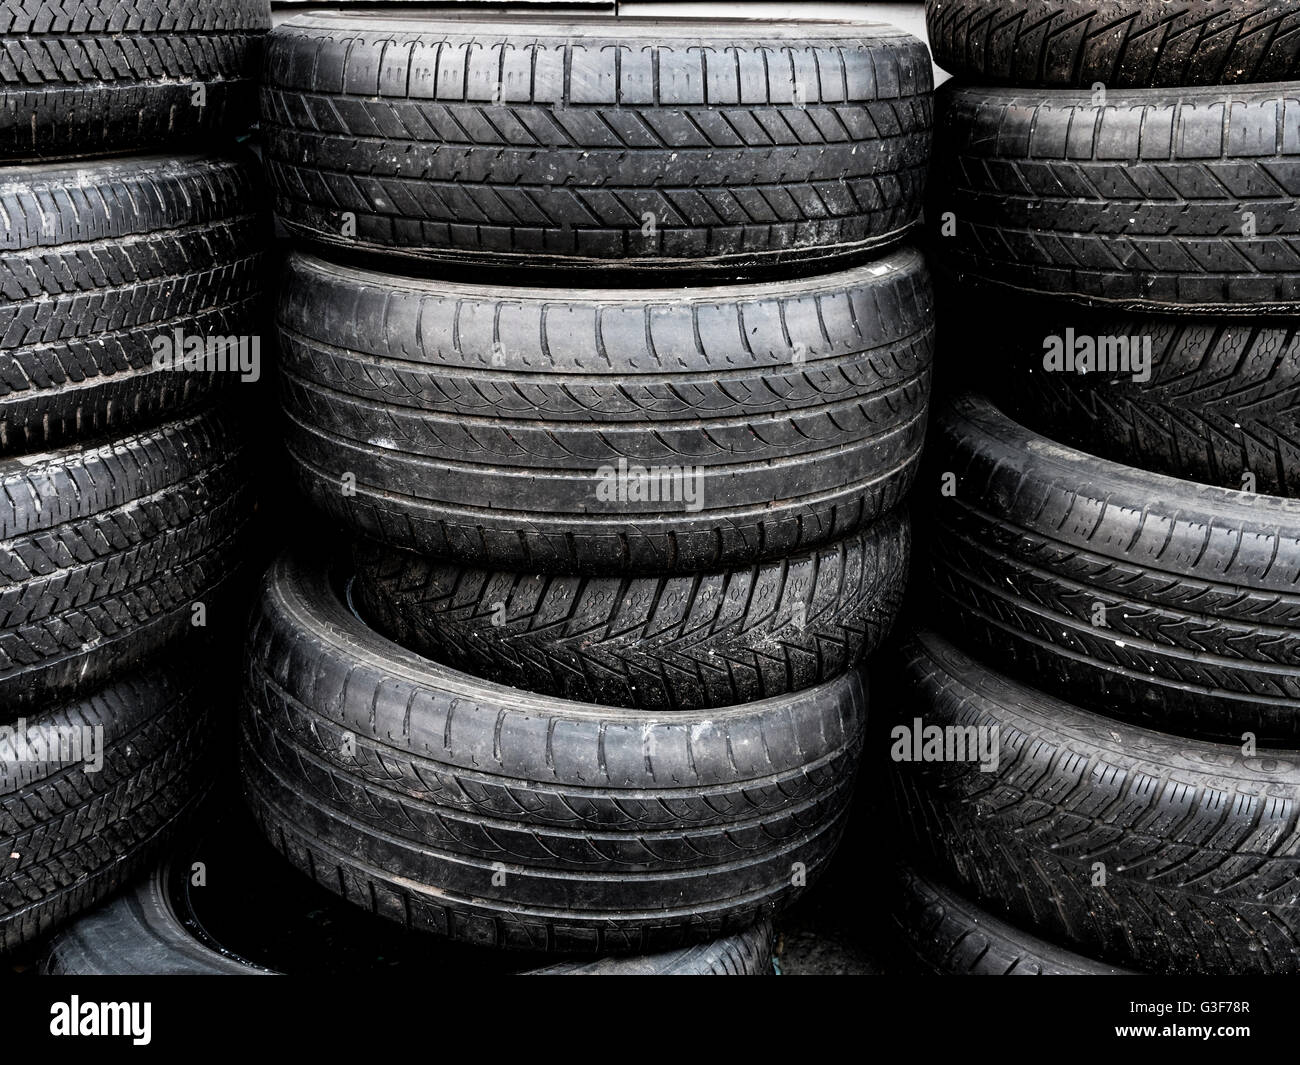 stack of used tires ready for recycling Stock Photo